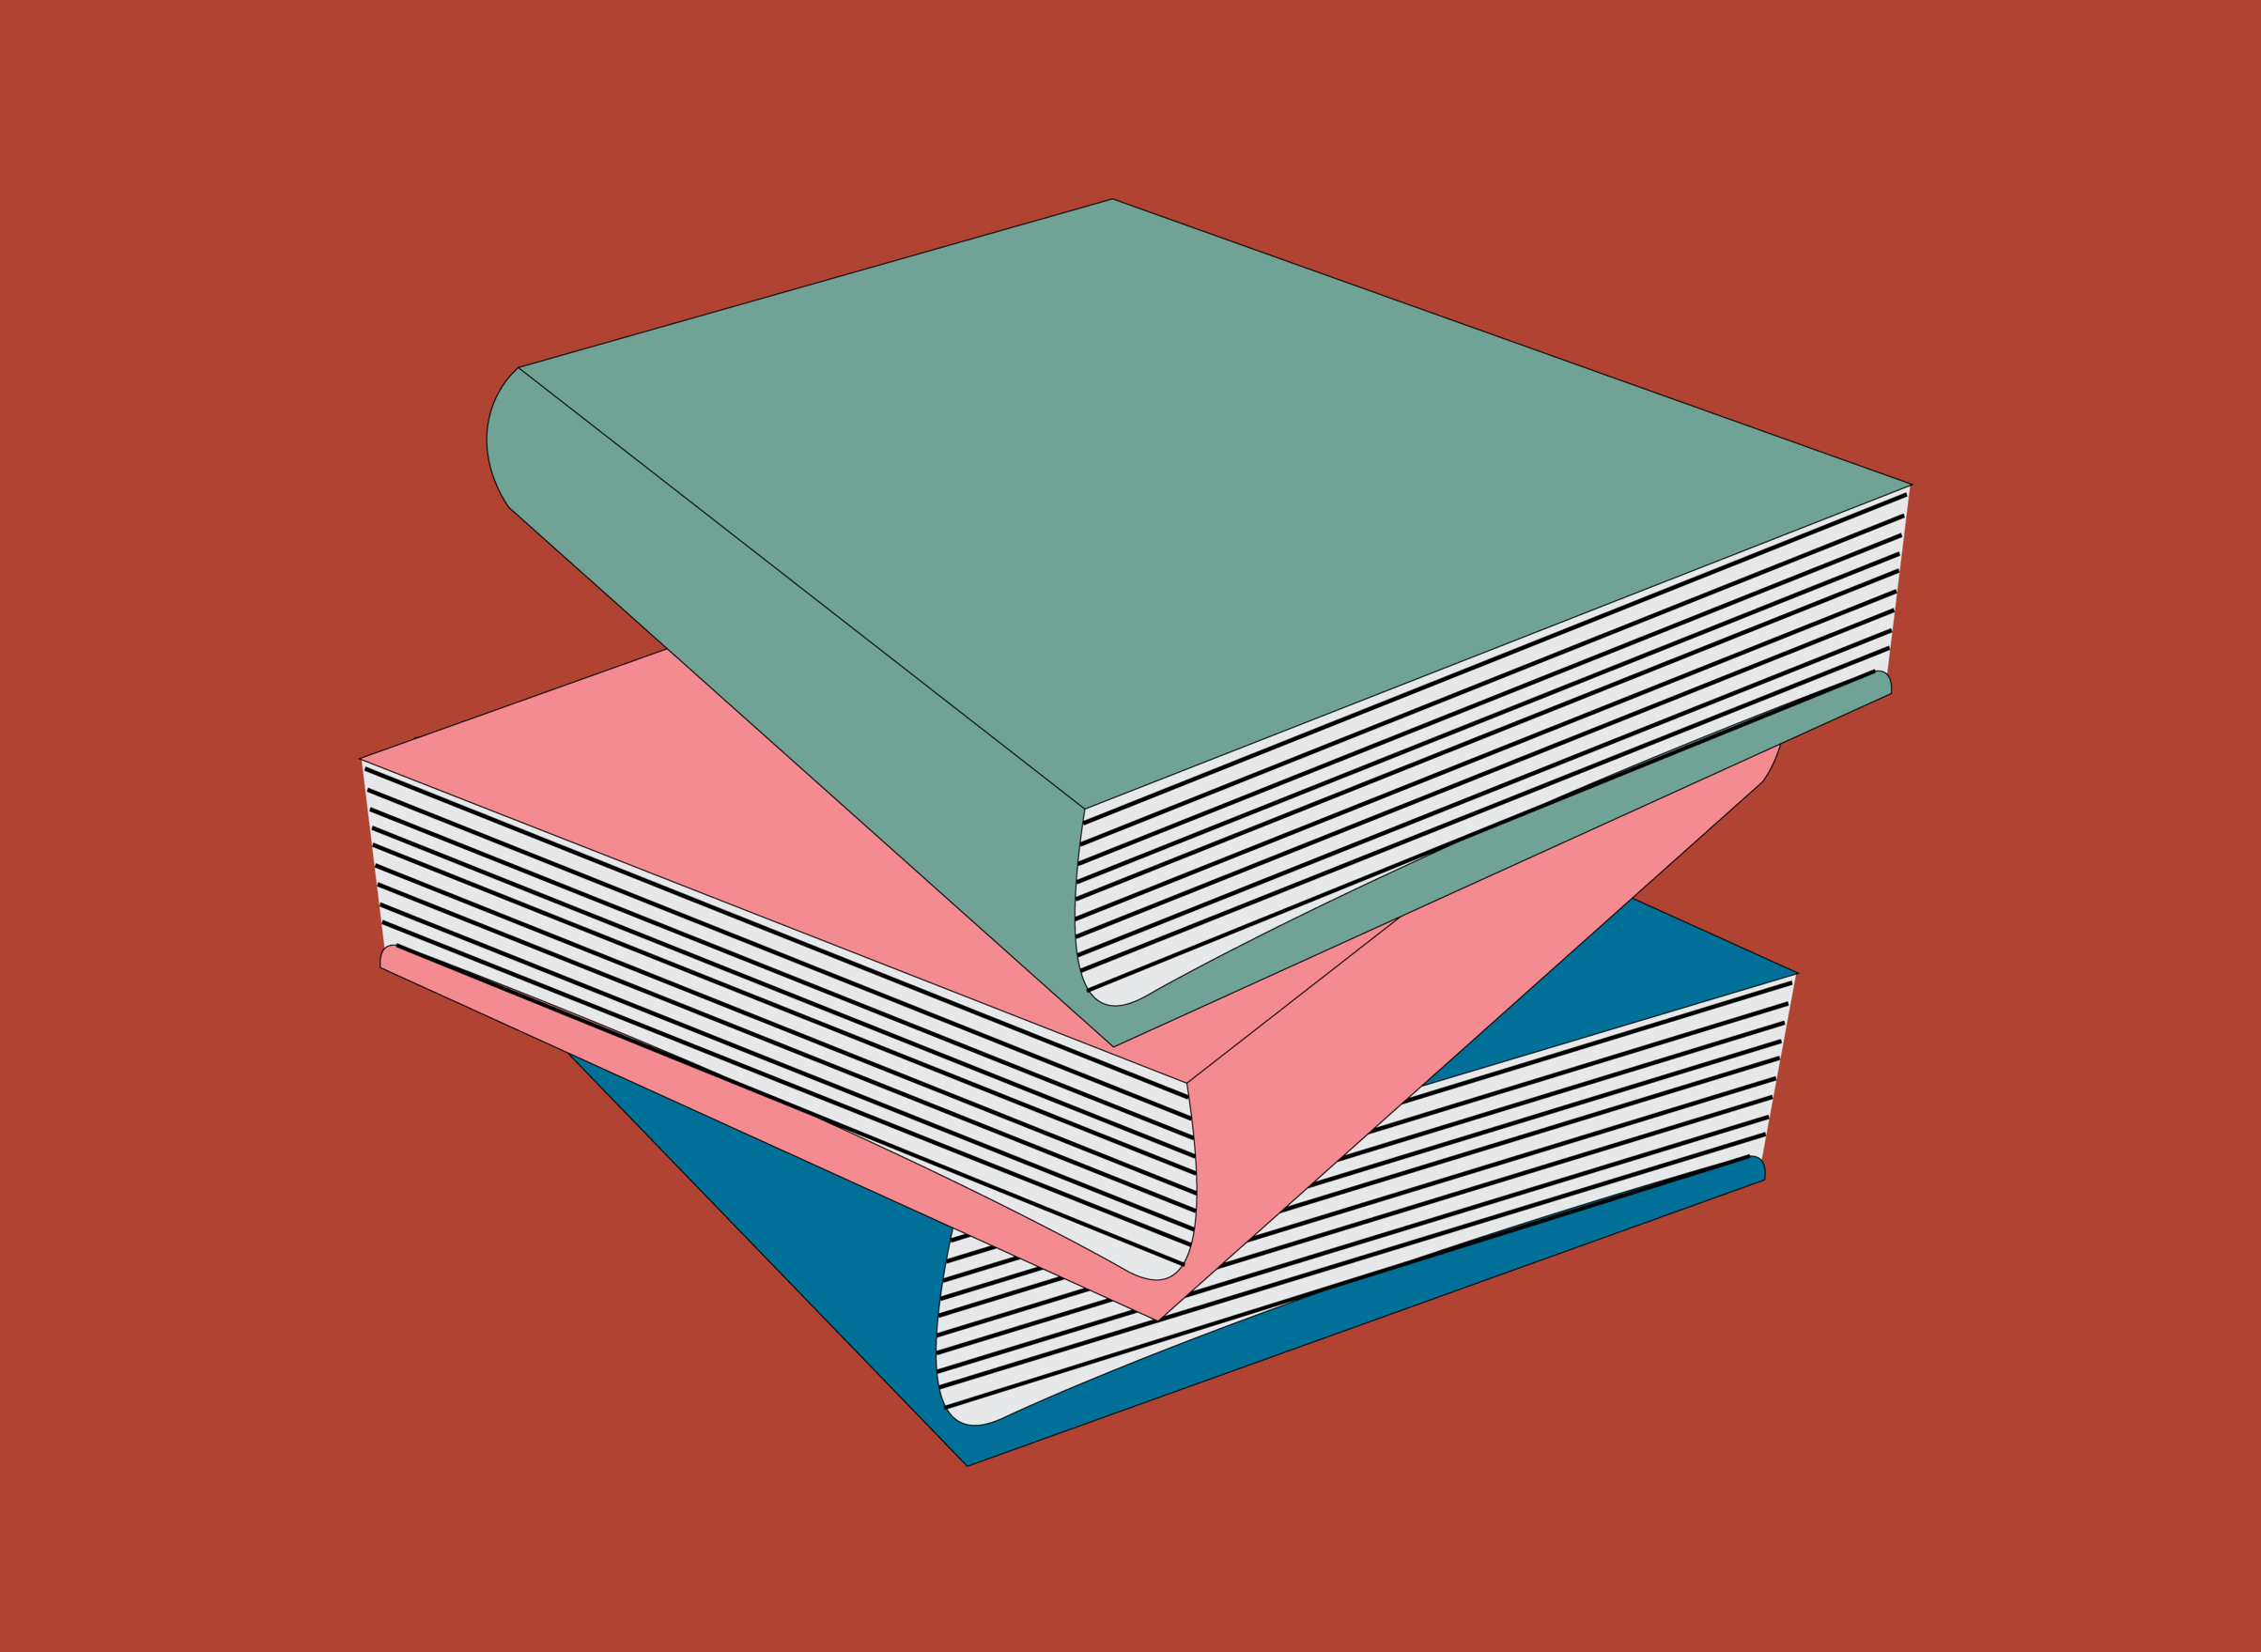 Graphic of books stacked. 